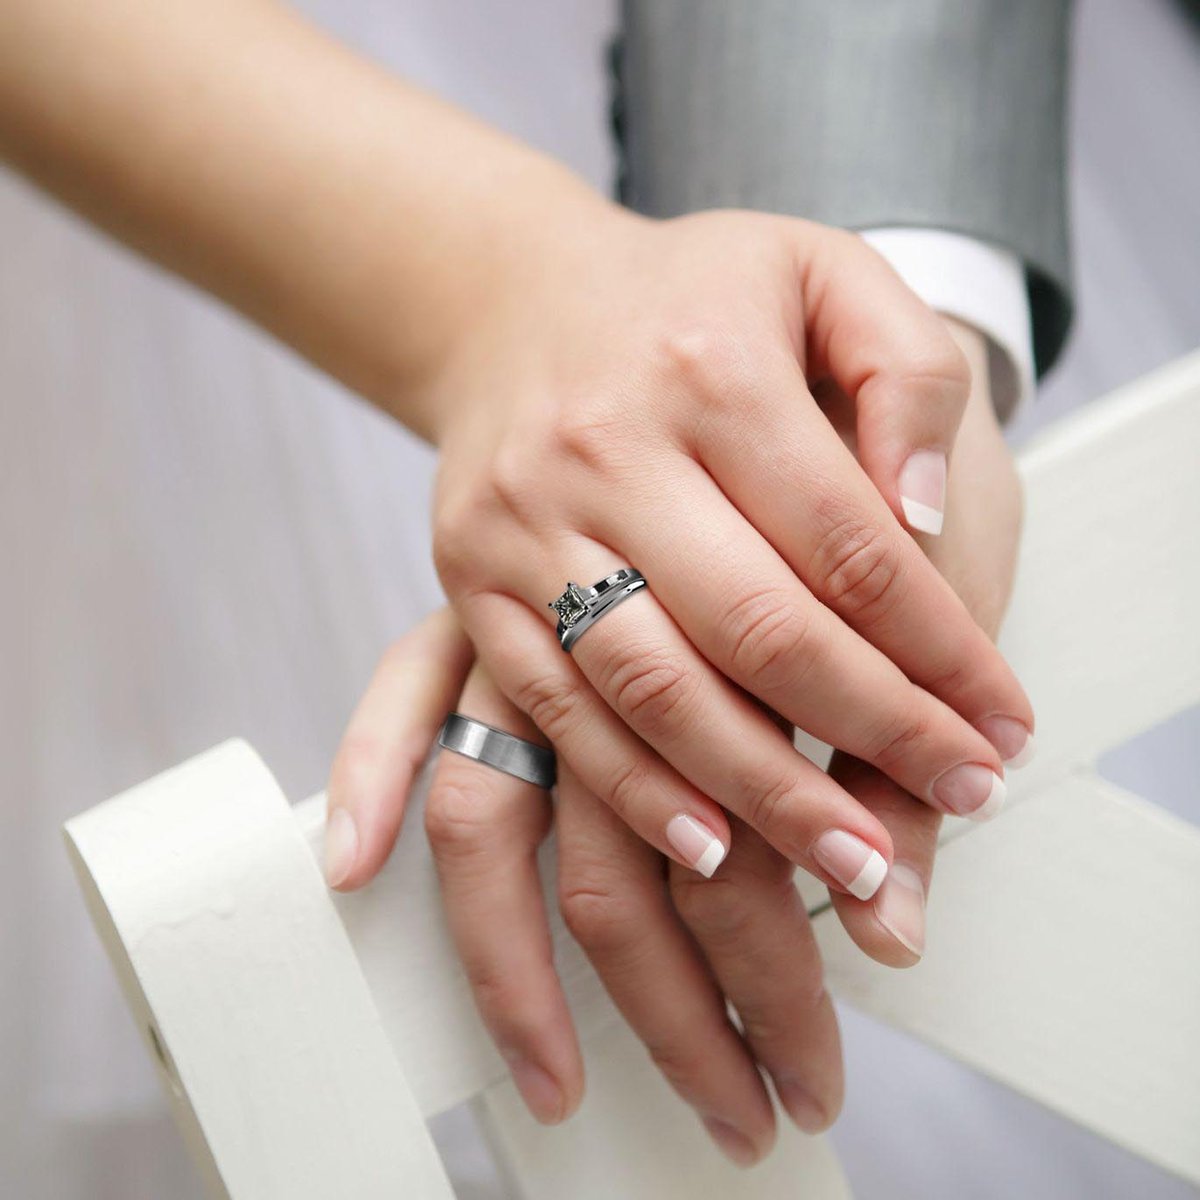 Ultimate Guide to Finding the Best Wedding Ring Stores